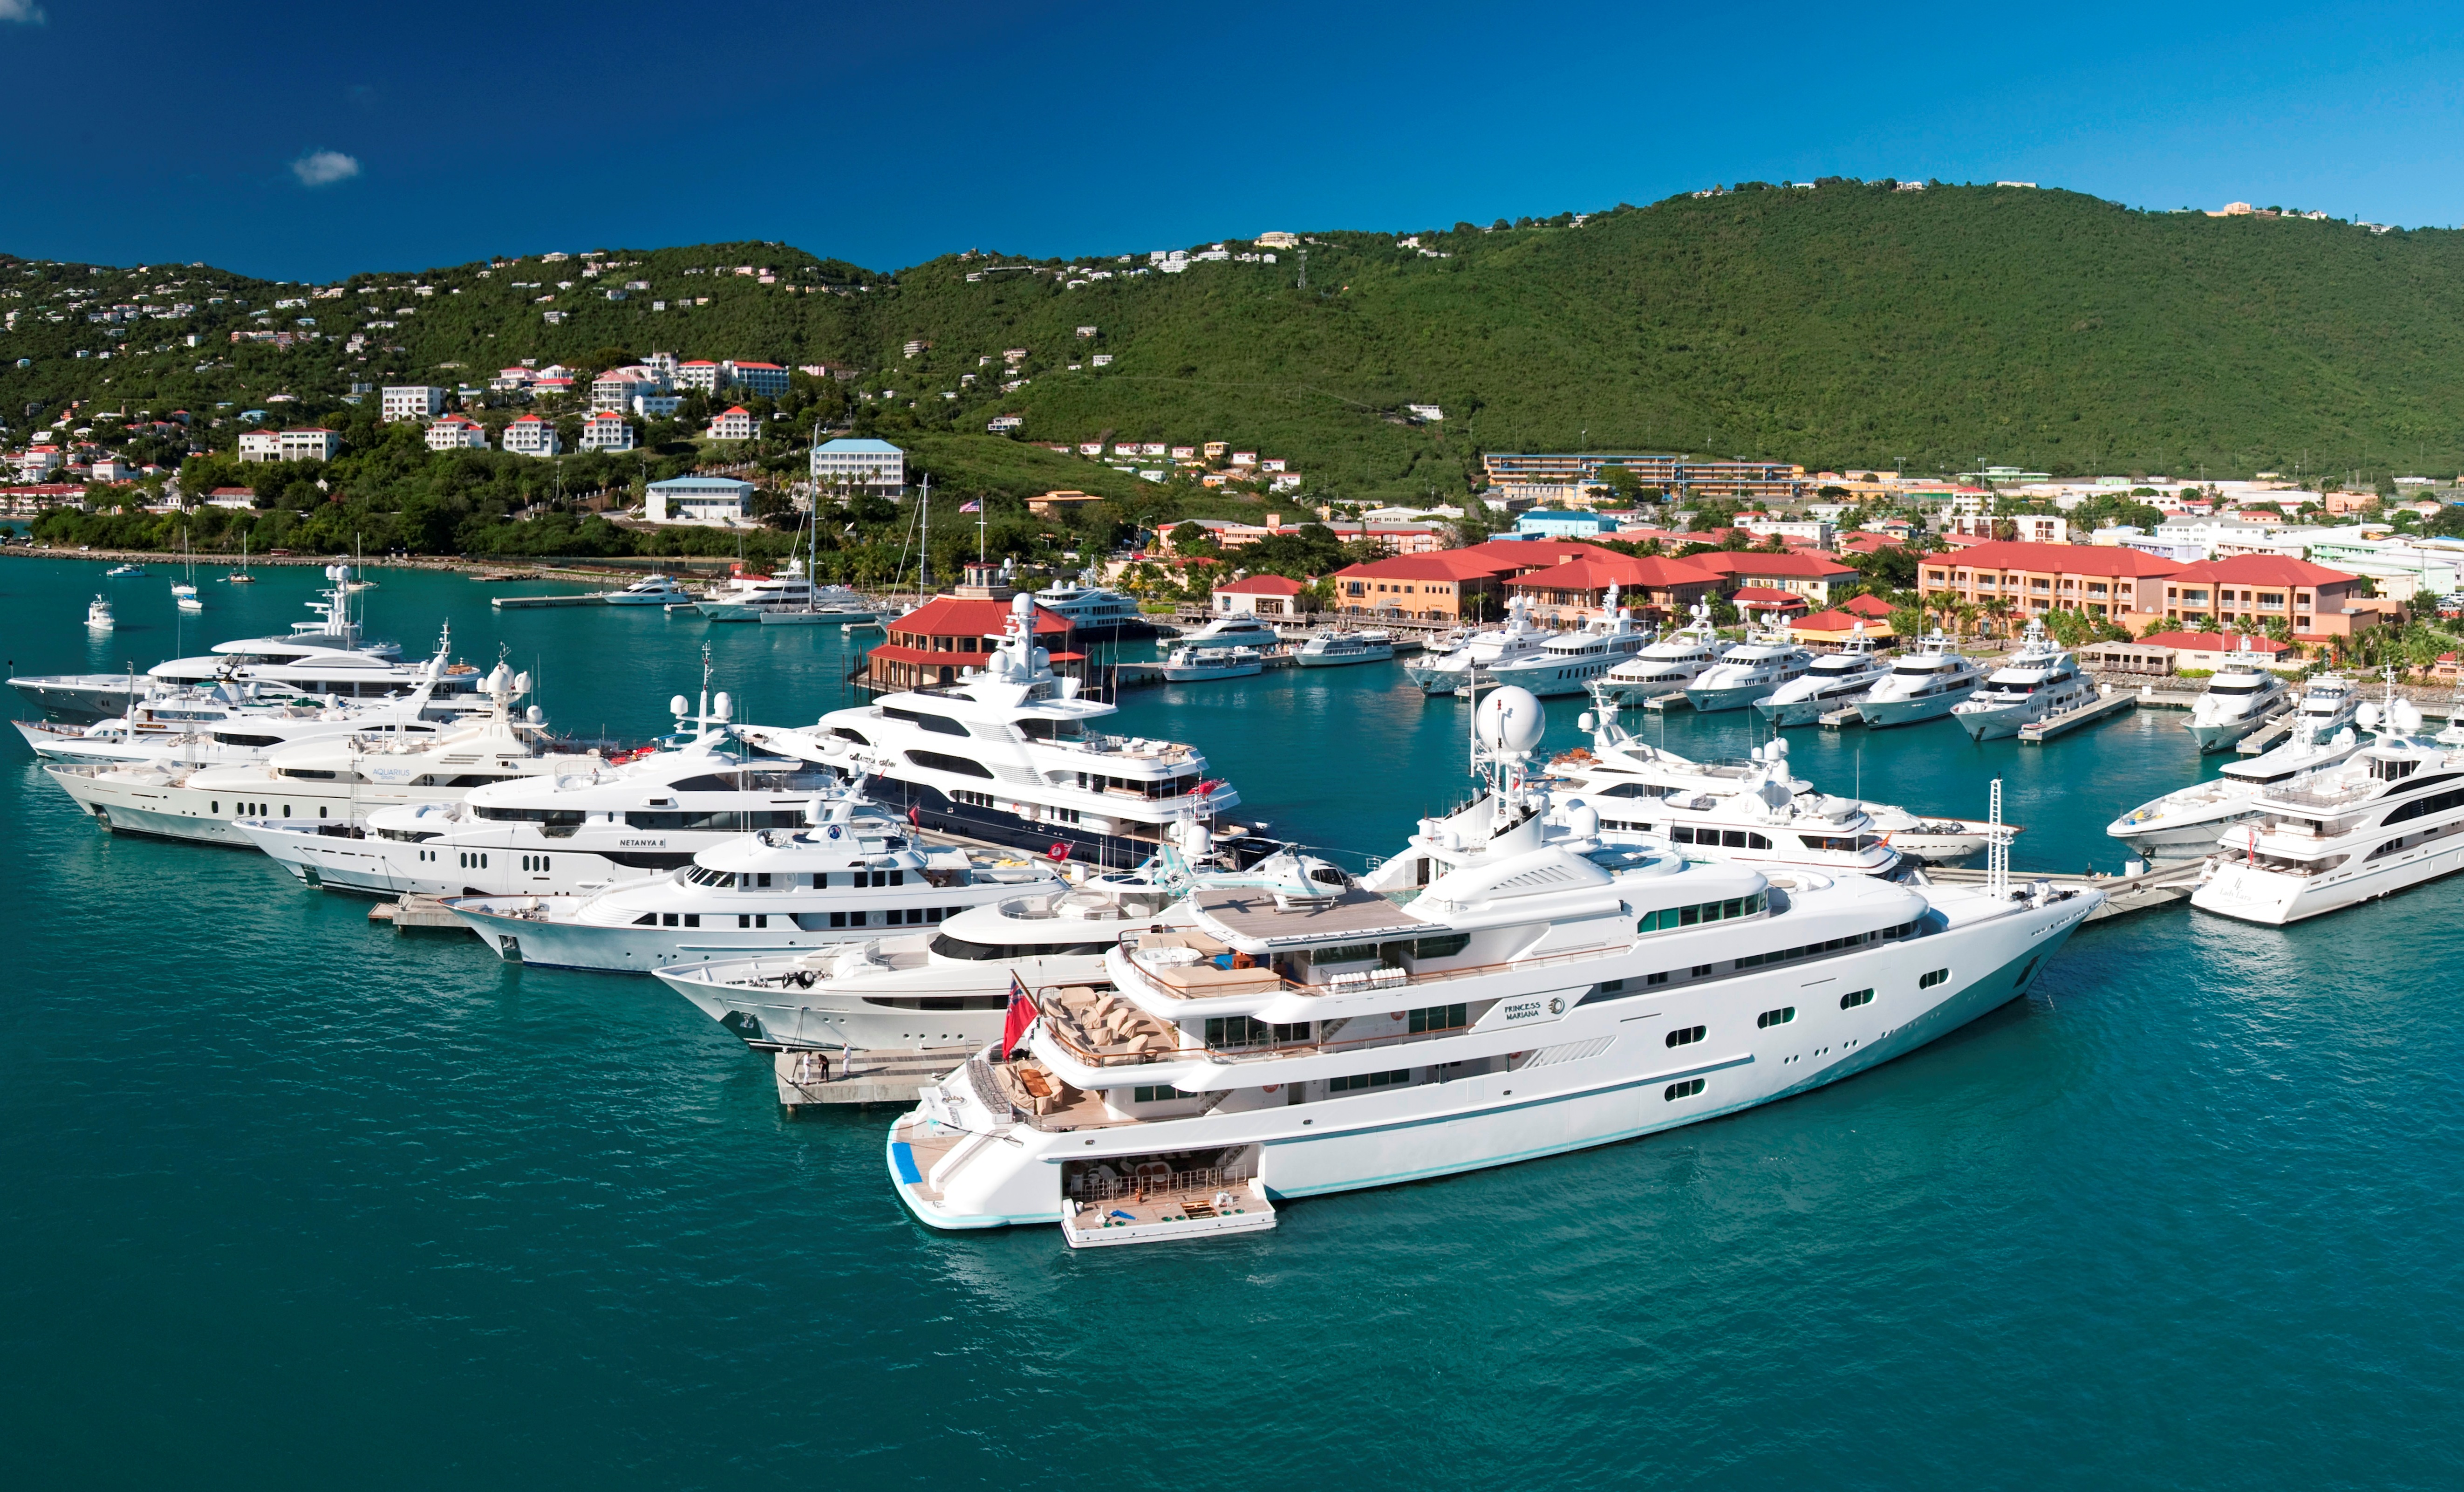 13 yacht haven